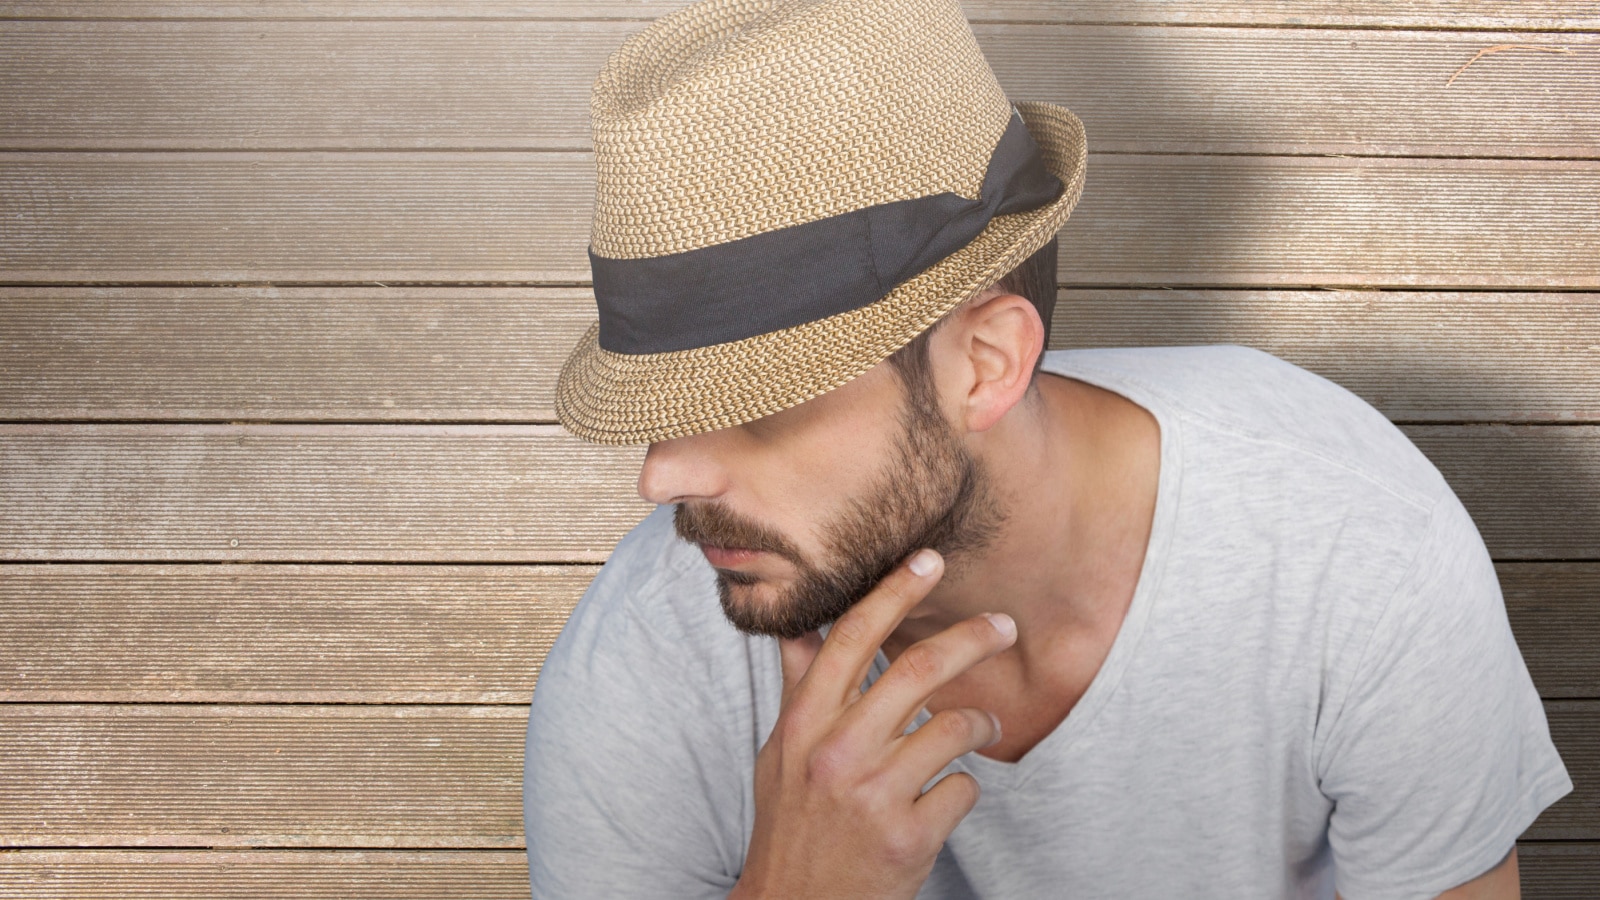 Handsome man wearing hat against wooden surface with planks